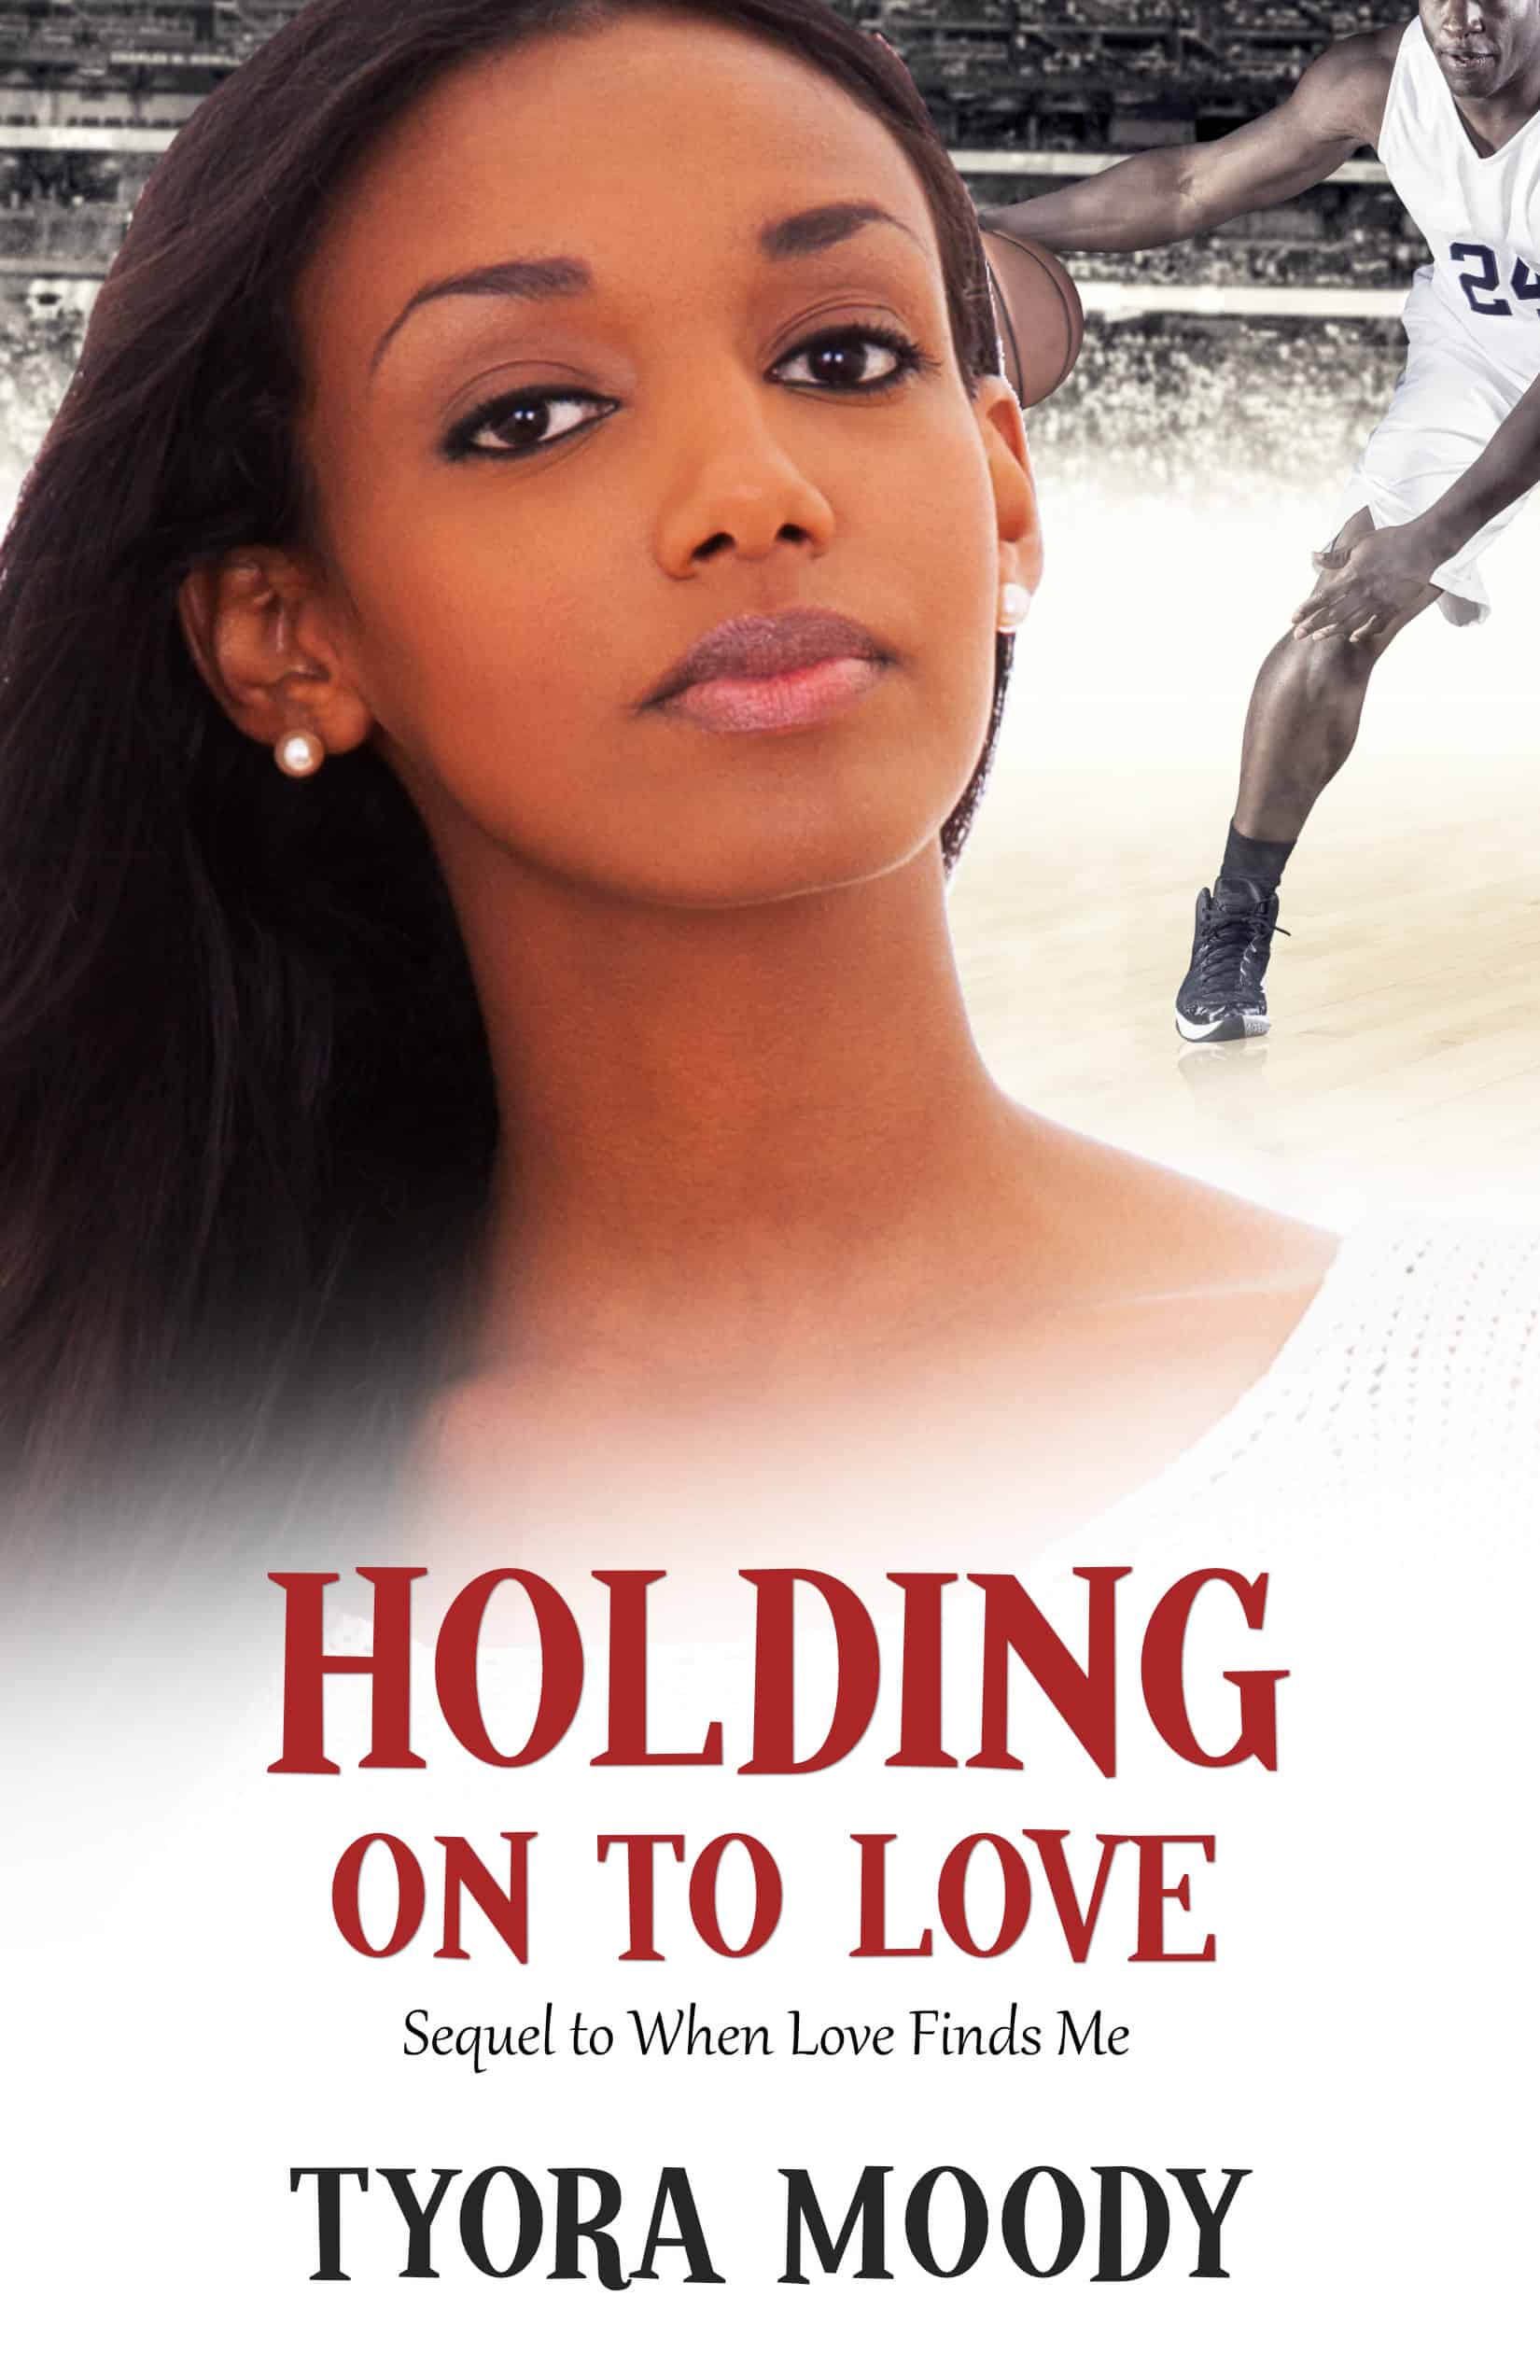 Holding On To Love (Victory Gospel Short 6)